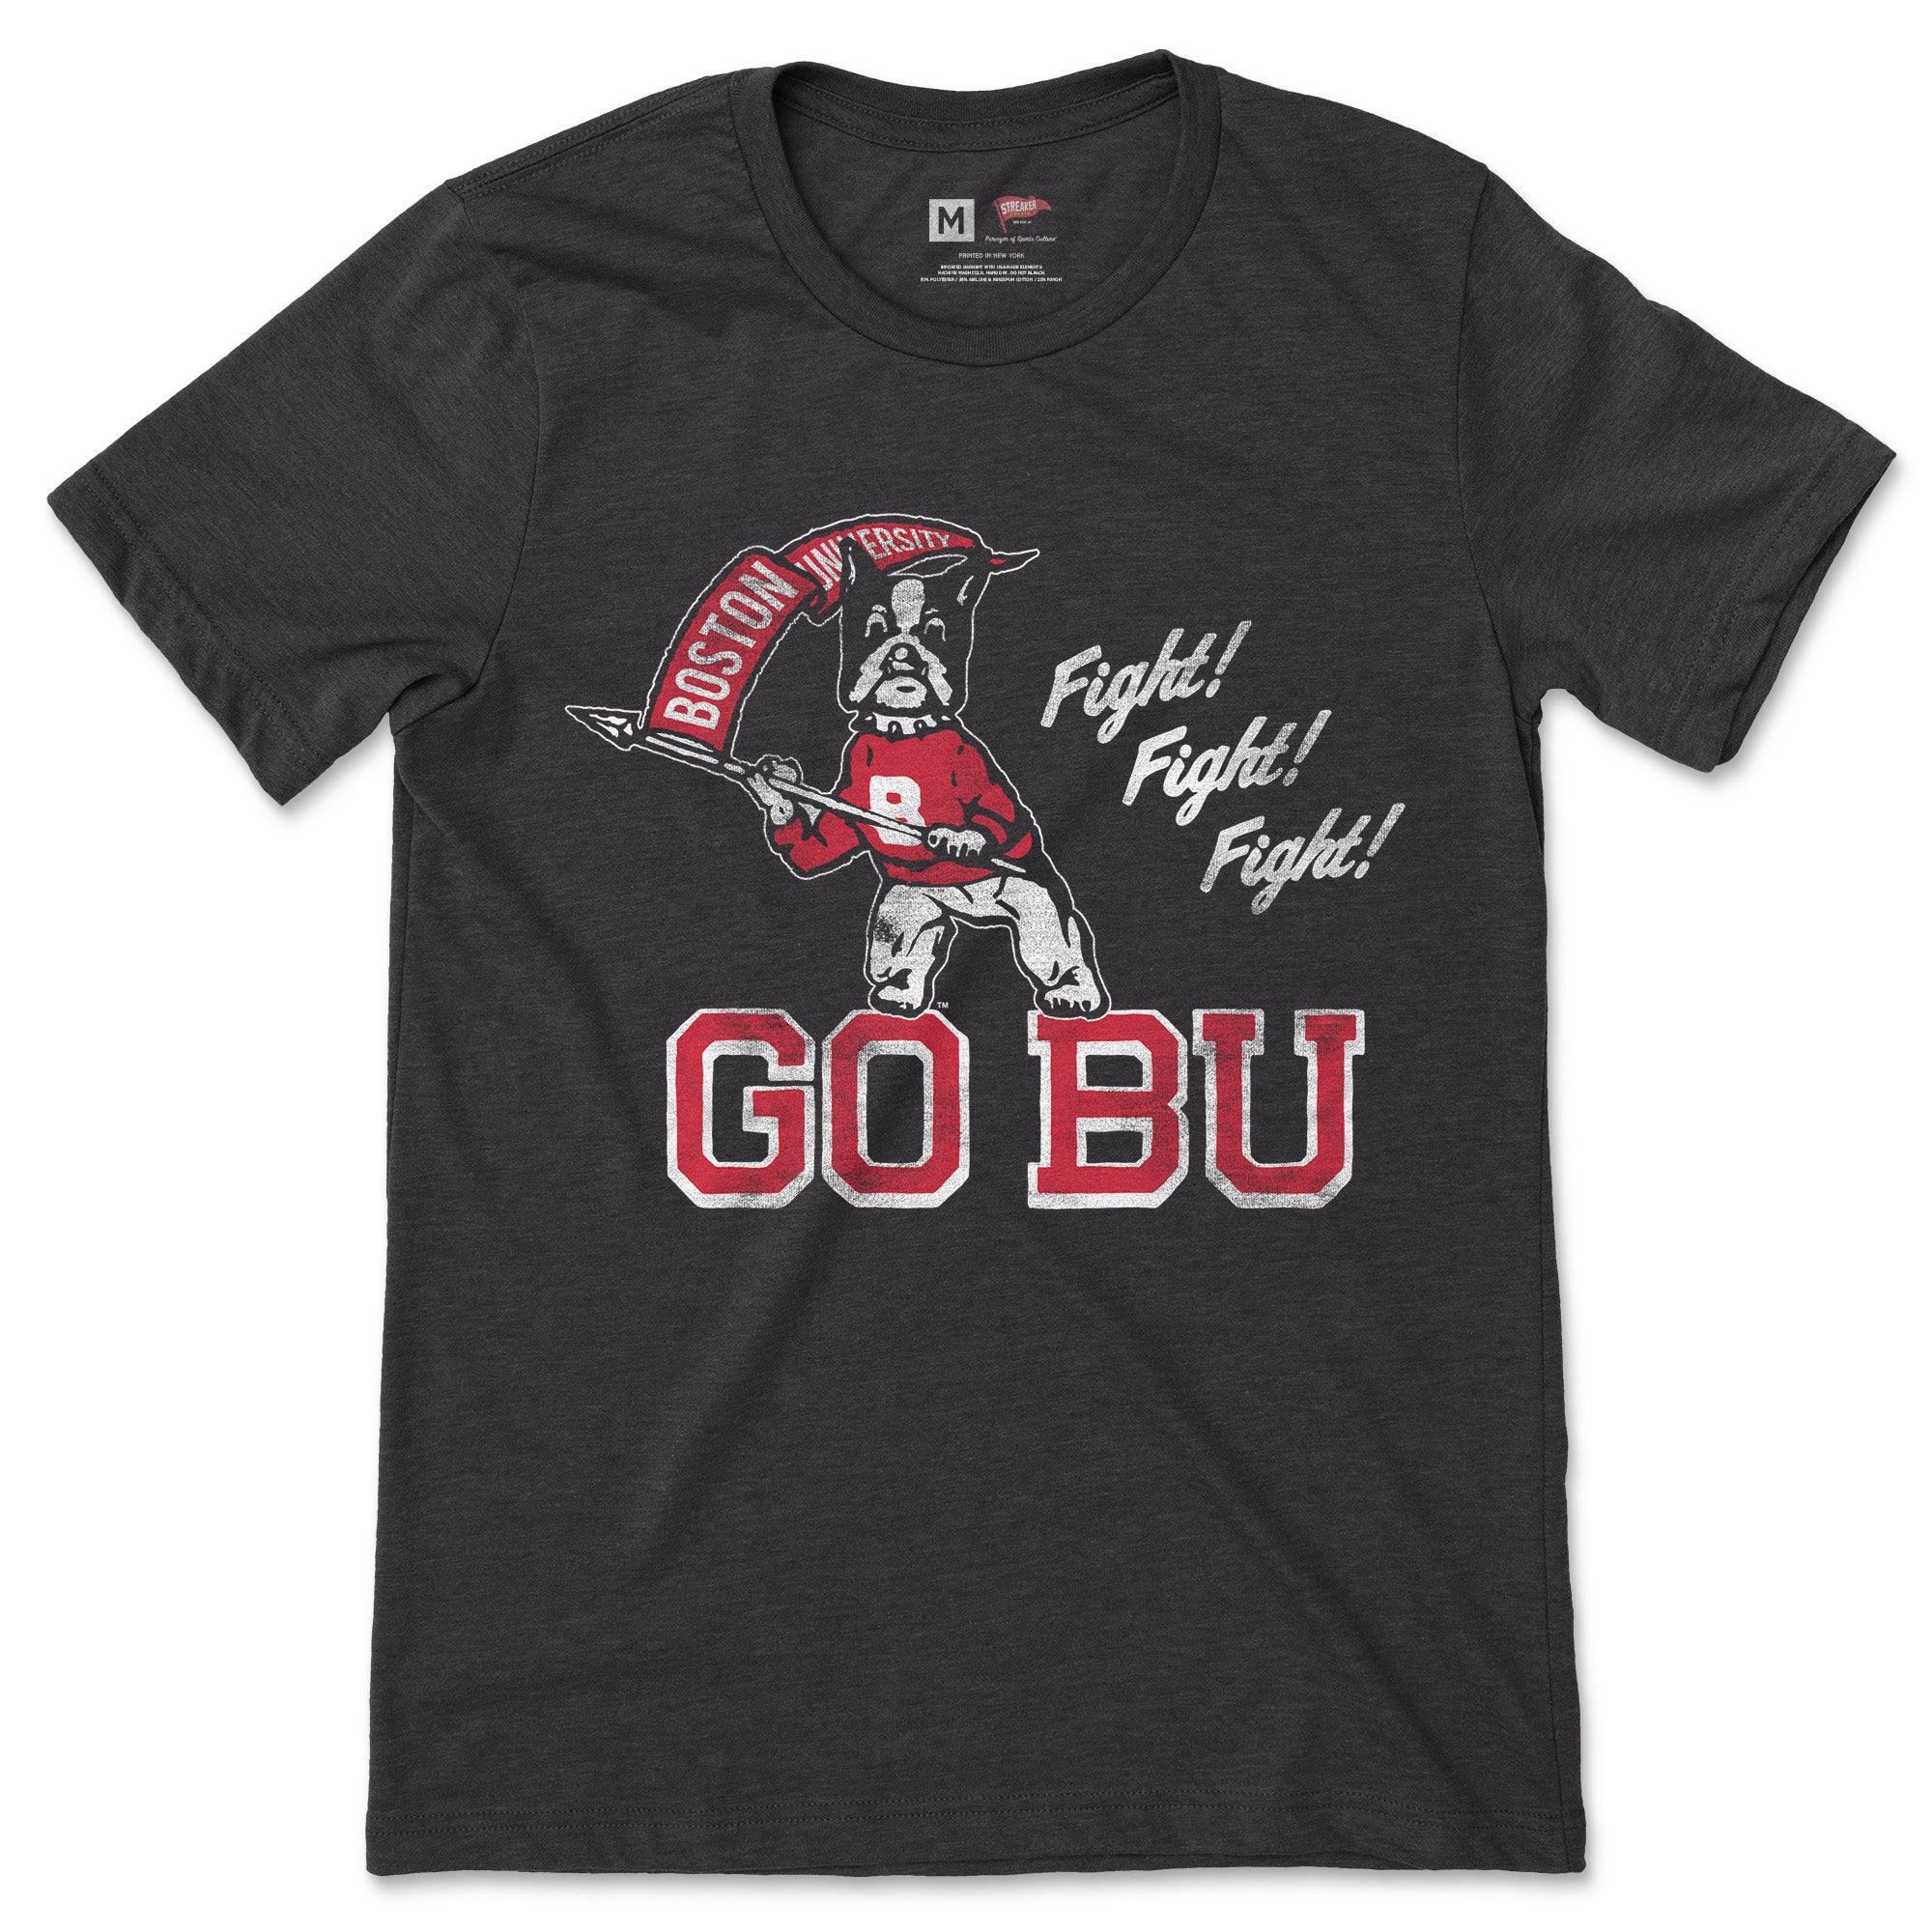 Funny boston university vintage fight song shirt - Limotees